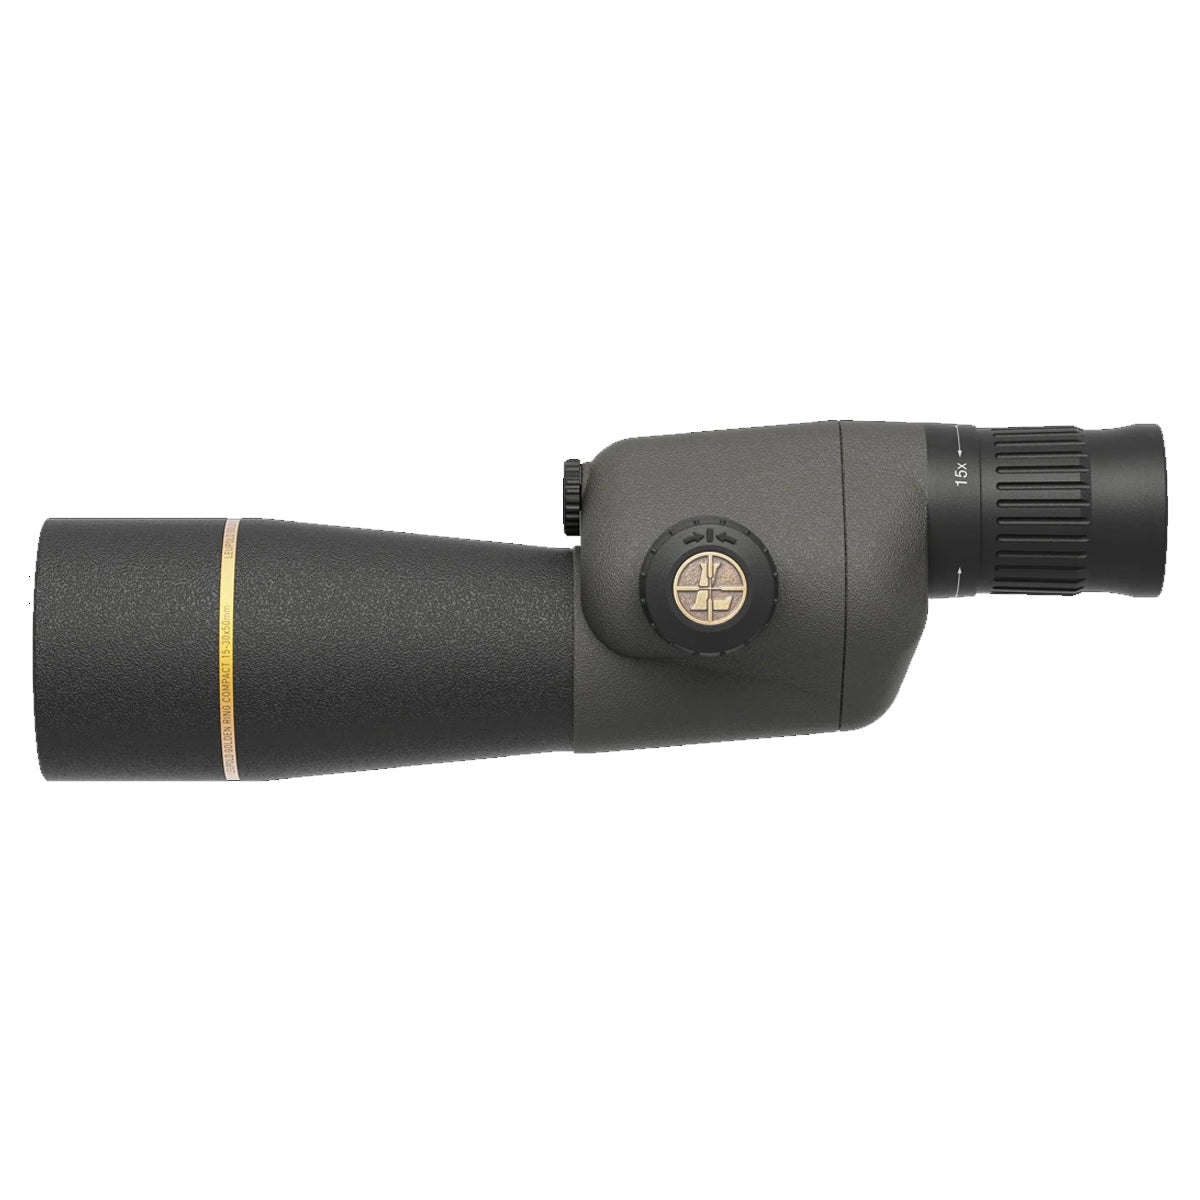 Leupold Gold Ring 15-30x50mm Compact Spotting Scope #120375 in  by GOHUNT | Leupold - GOHUNT Shop